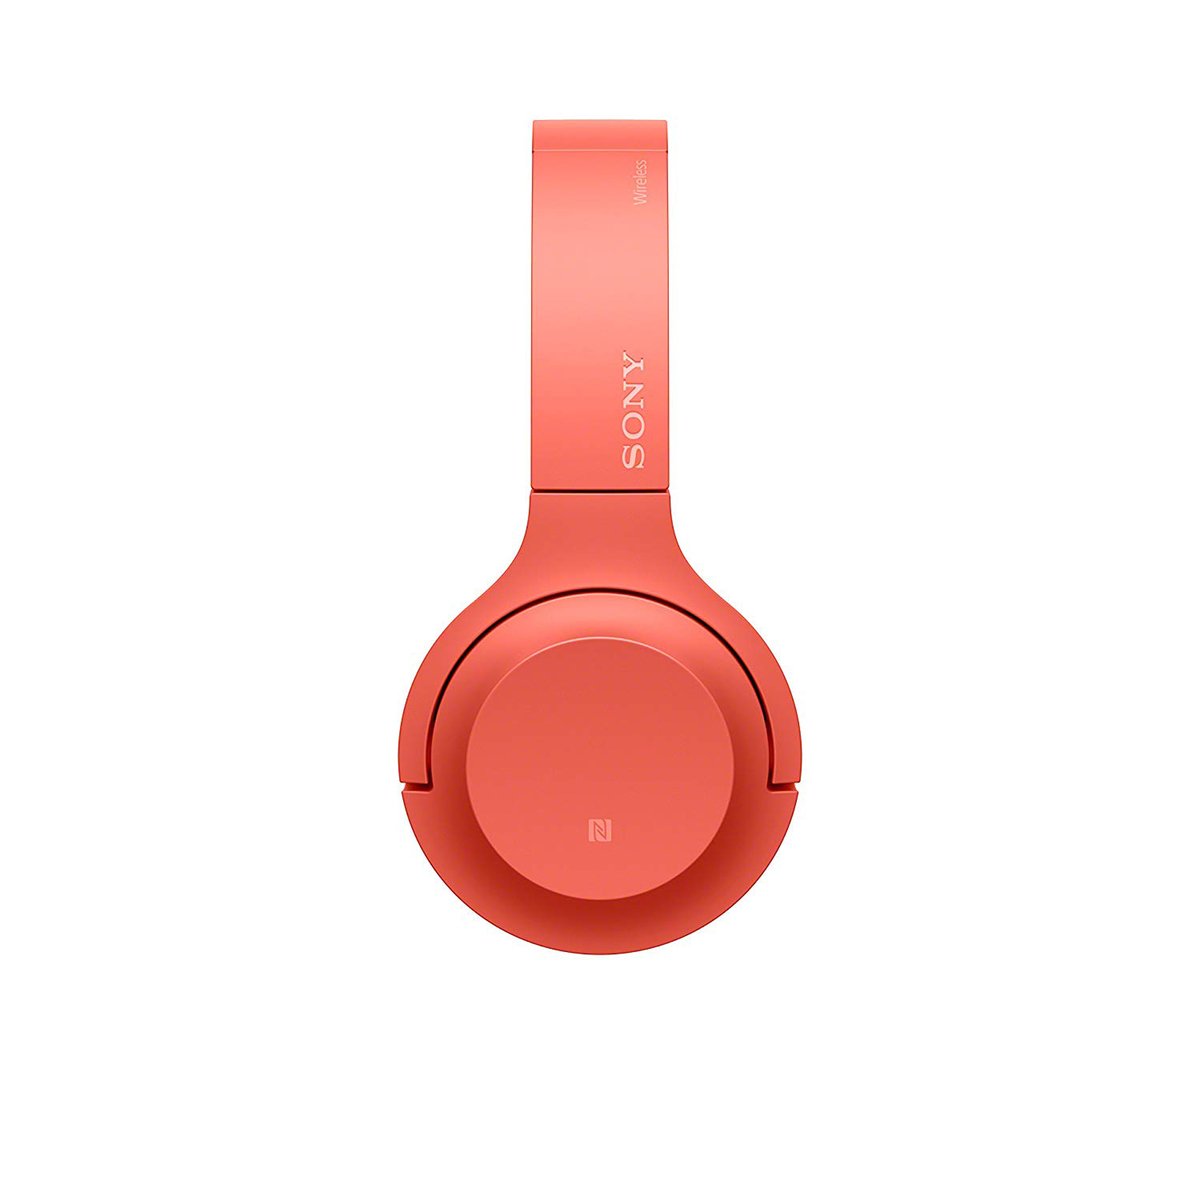 Sony Wireless Headphone WH-H800 Red